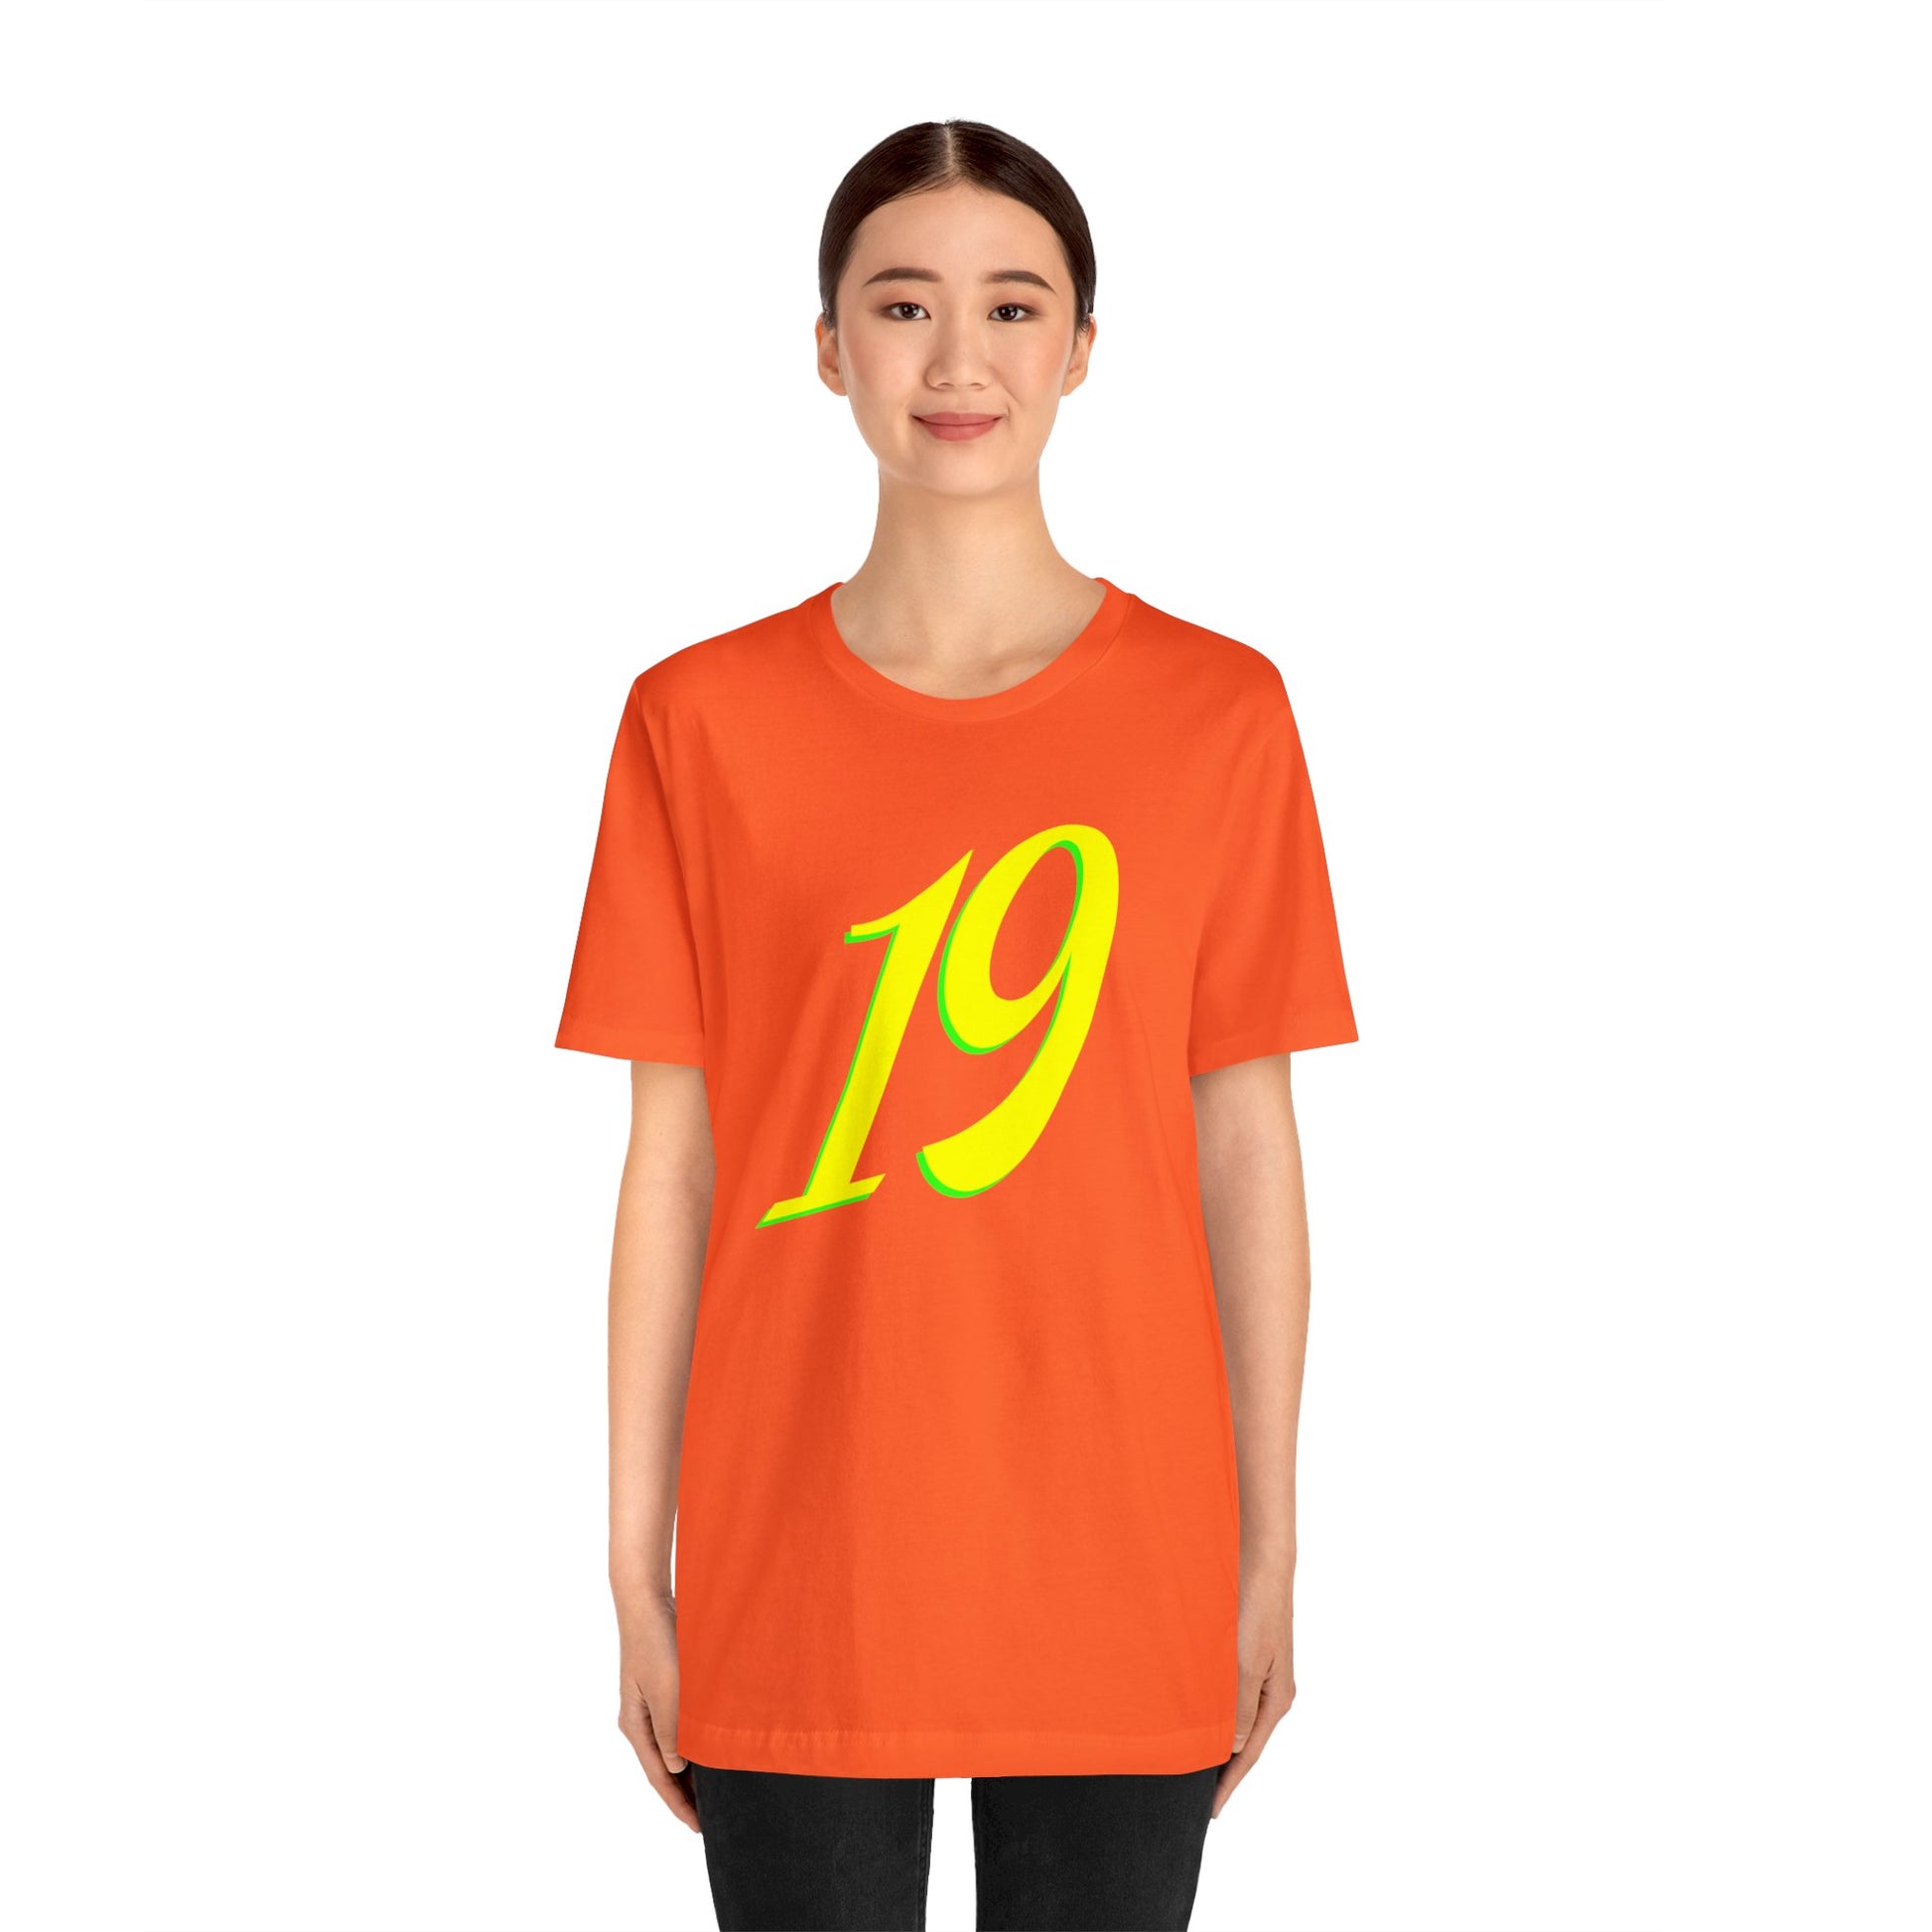 Number 19 Design - Soft Cotton Tee for birthdays and celebrations, Gift for friends and family, Multiple Options by clothezy.com in Black Size Medium - Buy Now